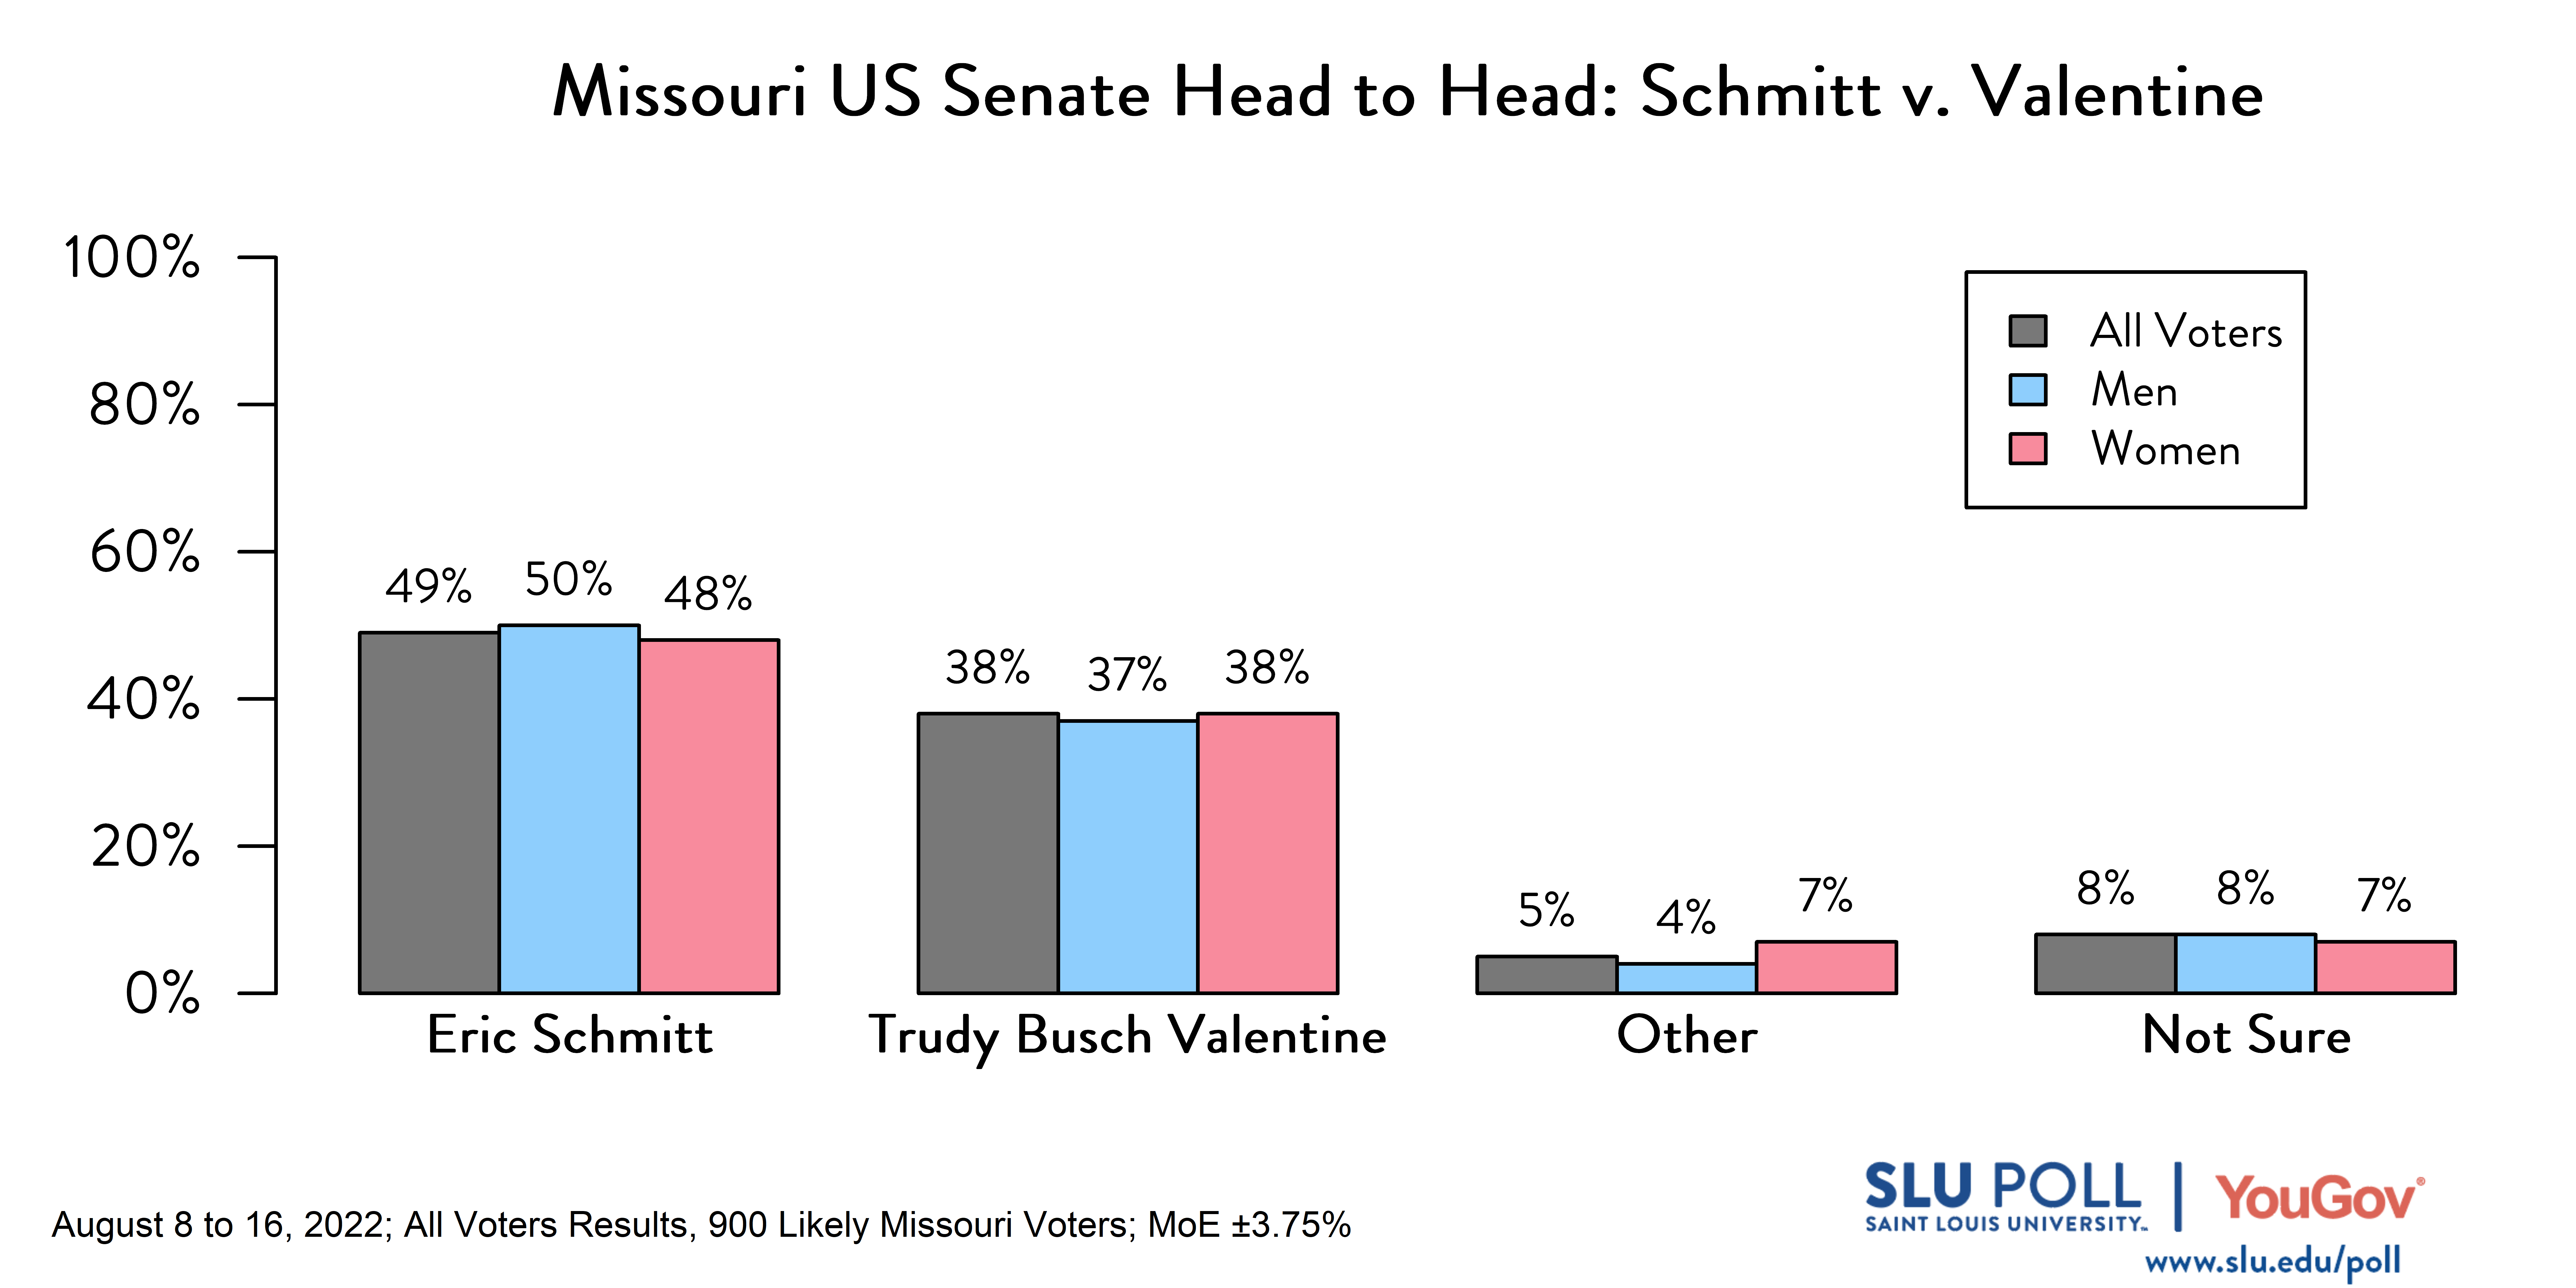 This bar graph contains results that show the gender breakdown among respondents who answered the question of who they'd vote for in the coming Missouri Senate election. 49% of respondents said they'd vote for Eric Schmitt, with 50% of those respondents being men and 48% being women. 38% of respondents said they'd vote for Trudy Busch Valentine, with 37% of those respondents being men and 38% being women. Of the 5% who said they'd vote for "other," 4% were men and 7% were women. Of the 8% who said they were "not sure," 8% were men and 7% were women.